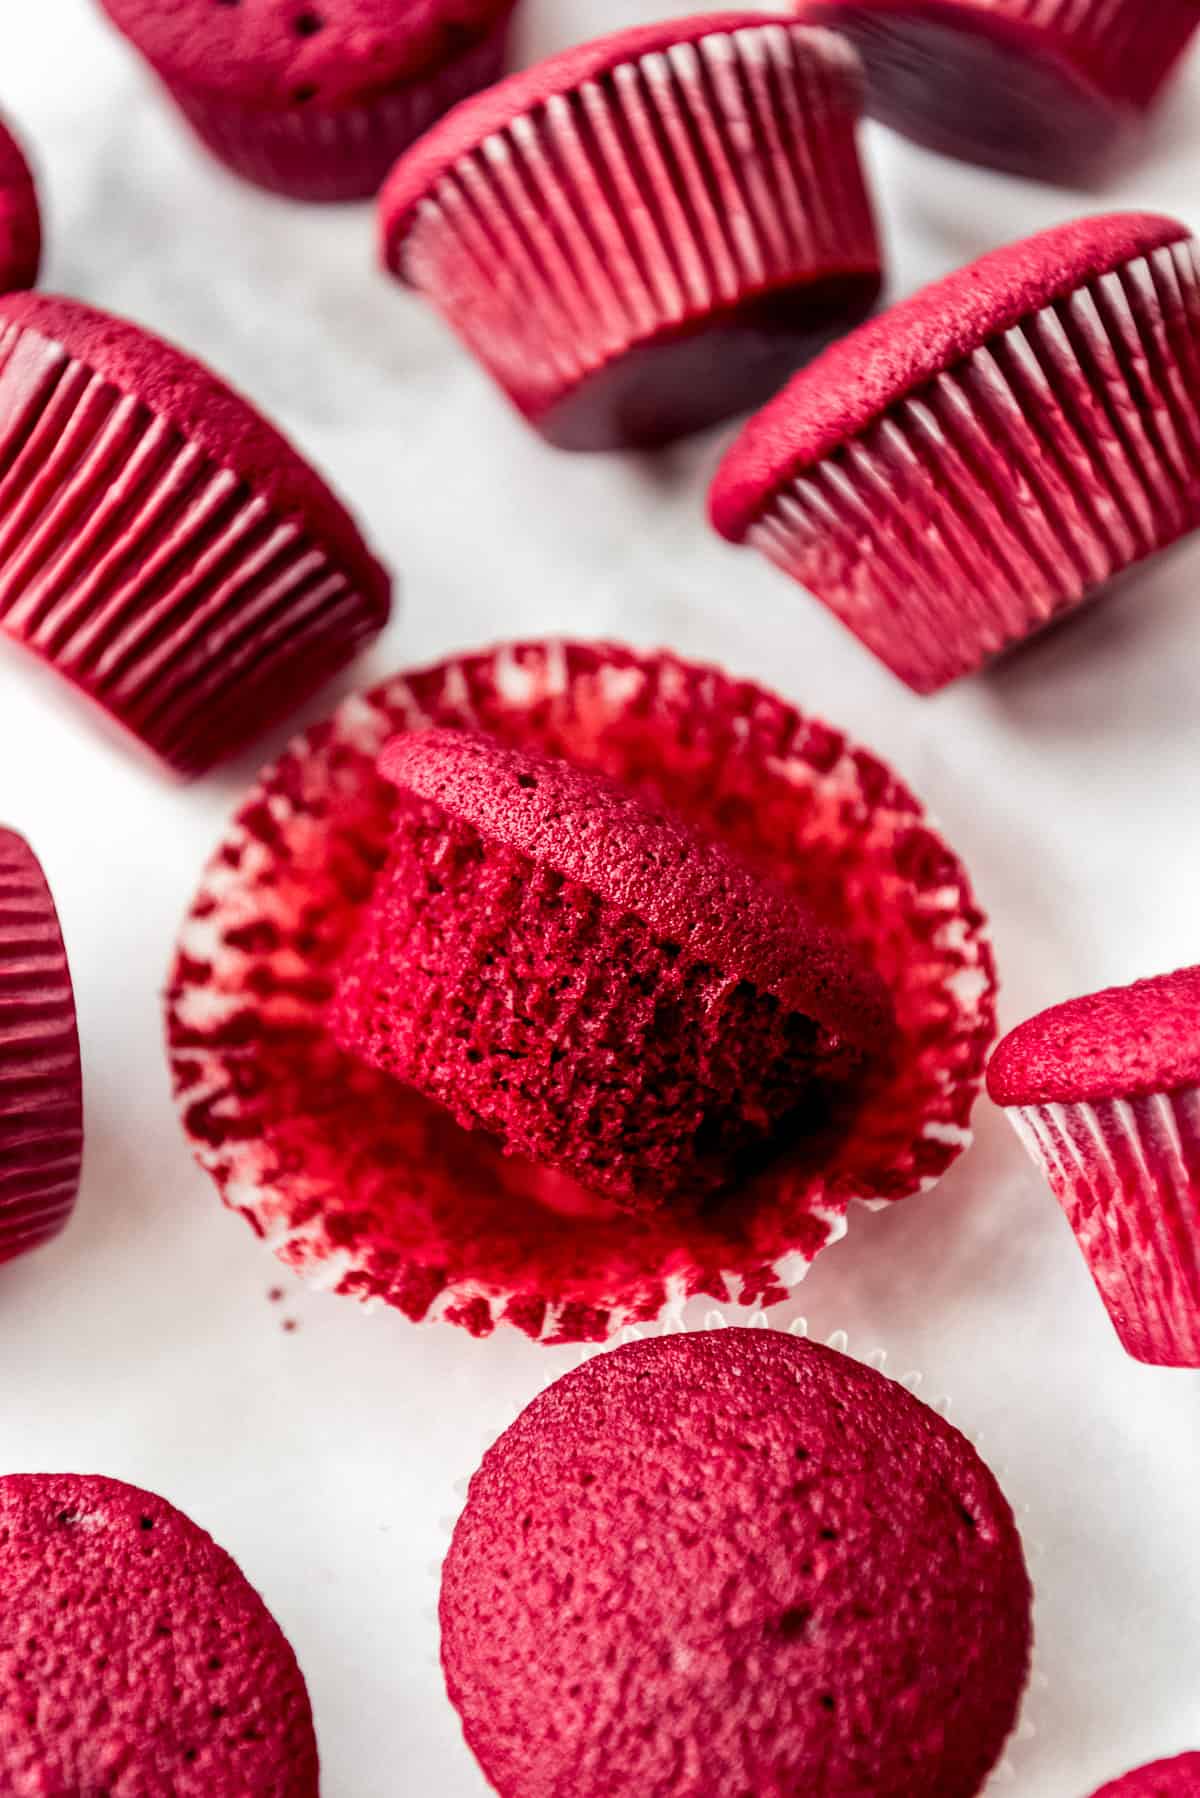 An unwrapped, unfrosted red velvet cupcake.